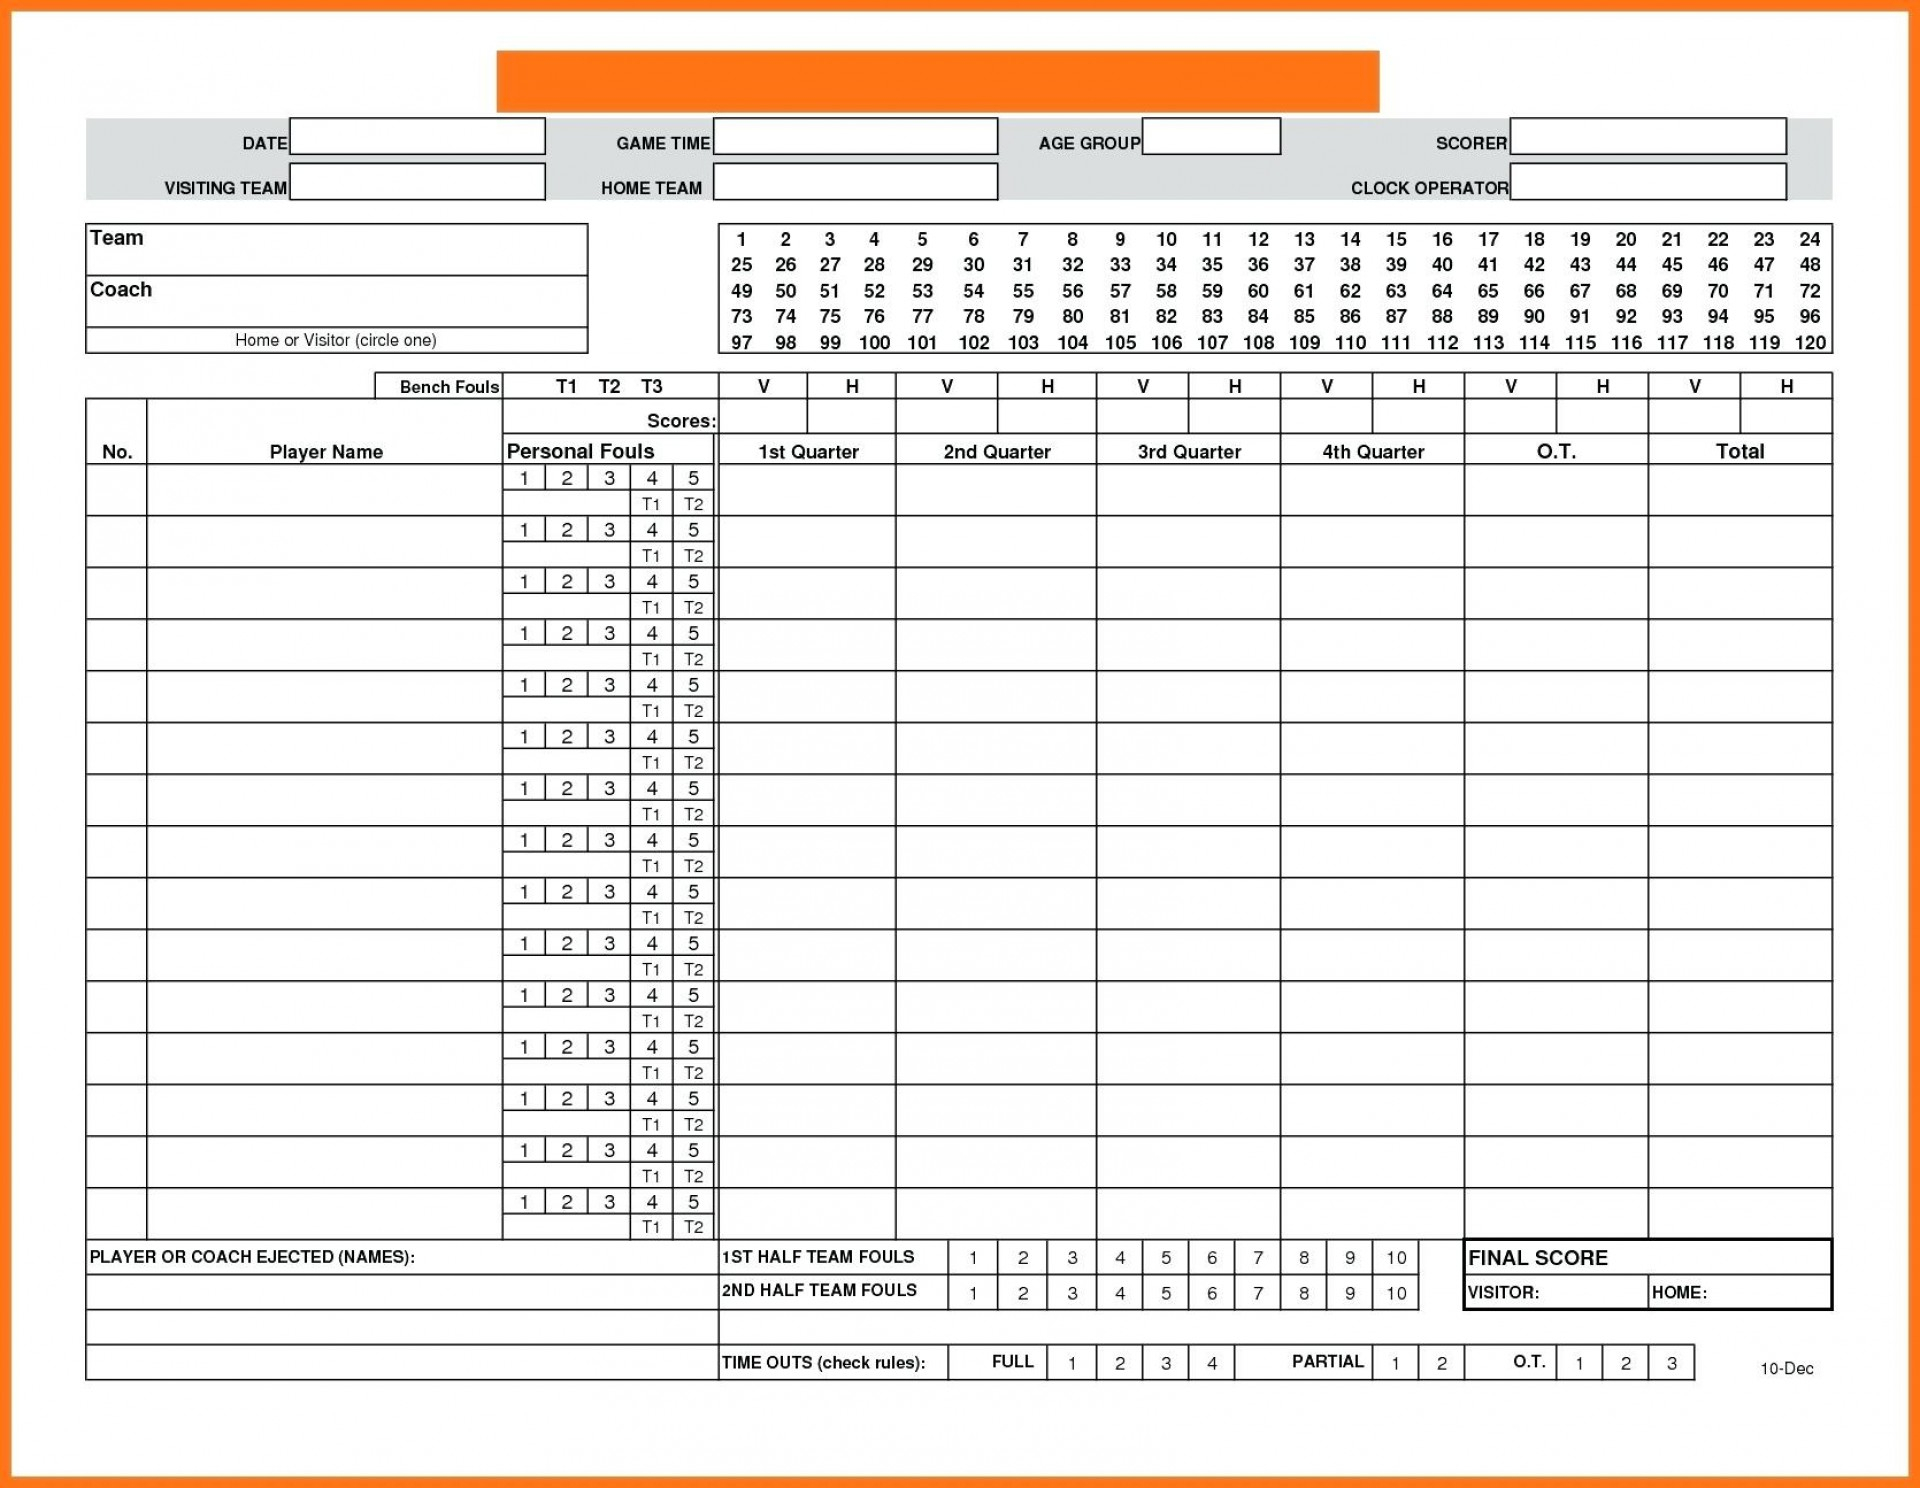 Youth Baseball Stats Spreadsheet Inside 022 Softball Lineup Template Excel Ideas Roster Youth Baseball Stats